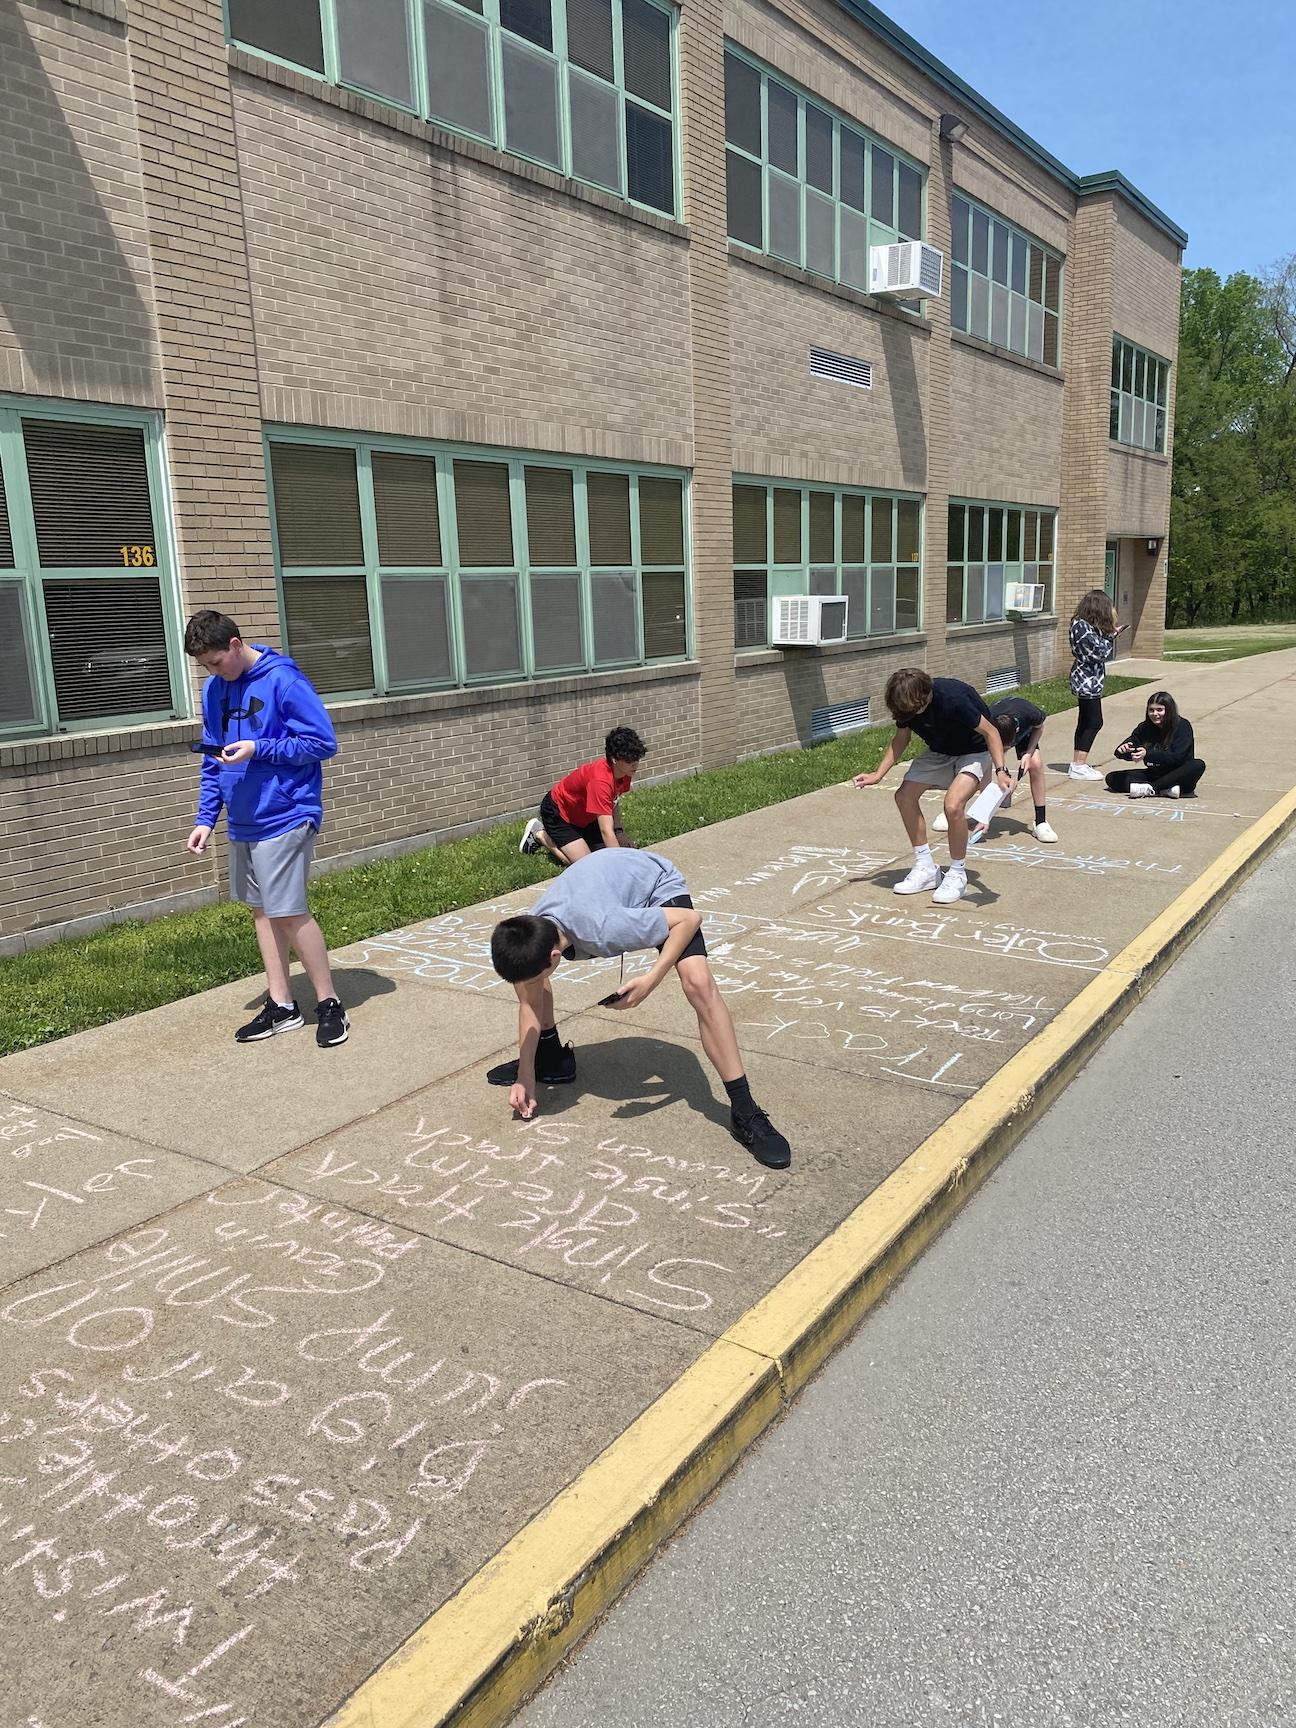 The students write their haiku poems with chalk